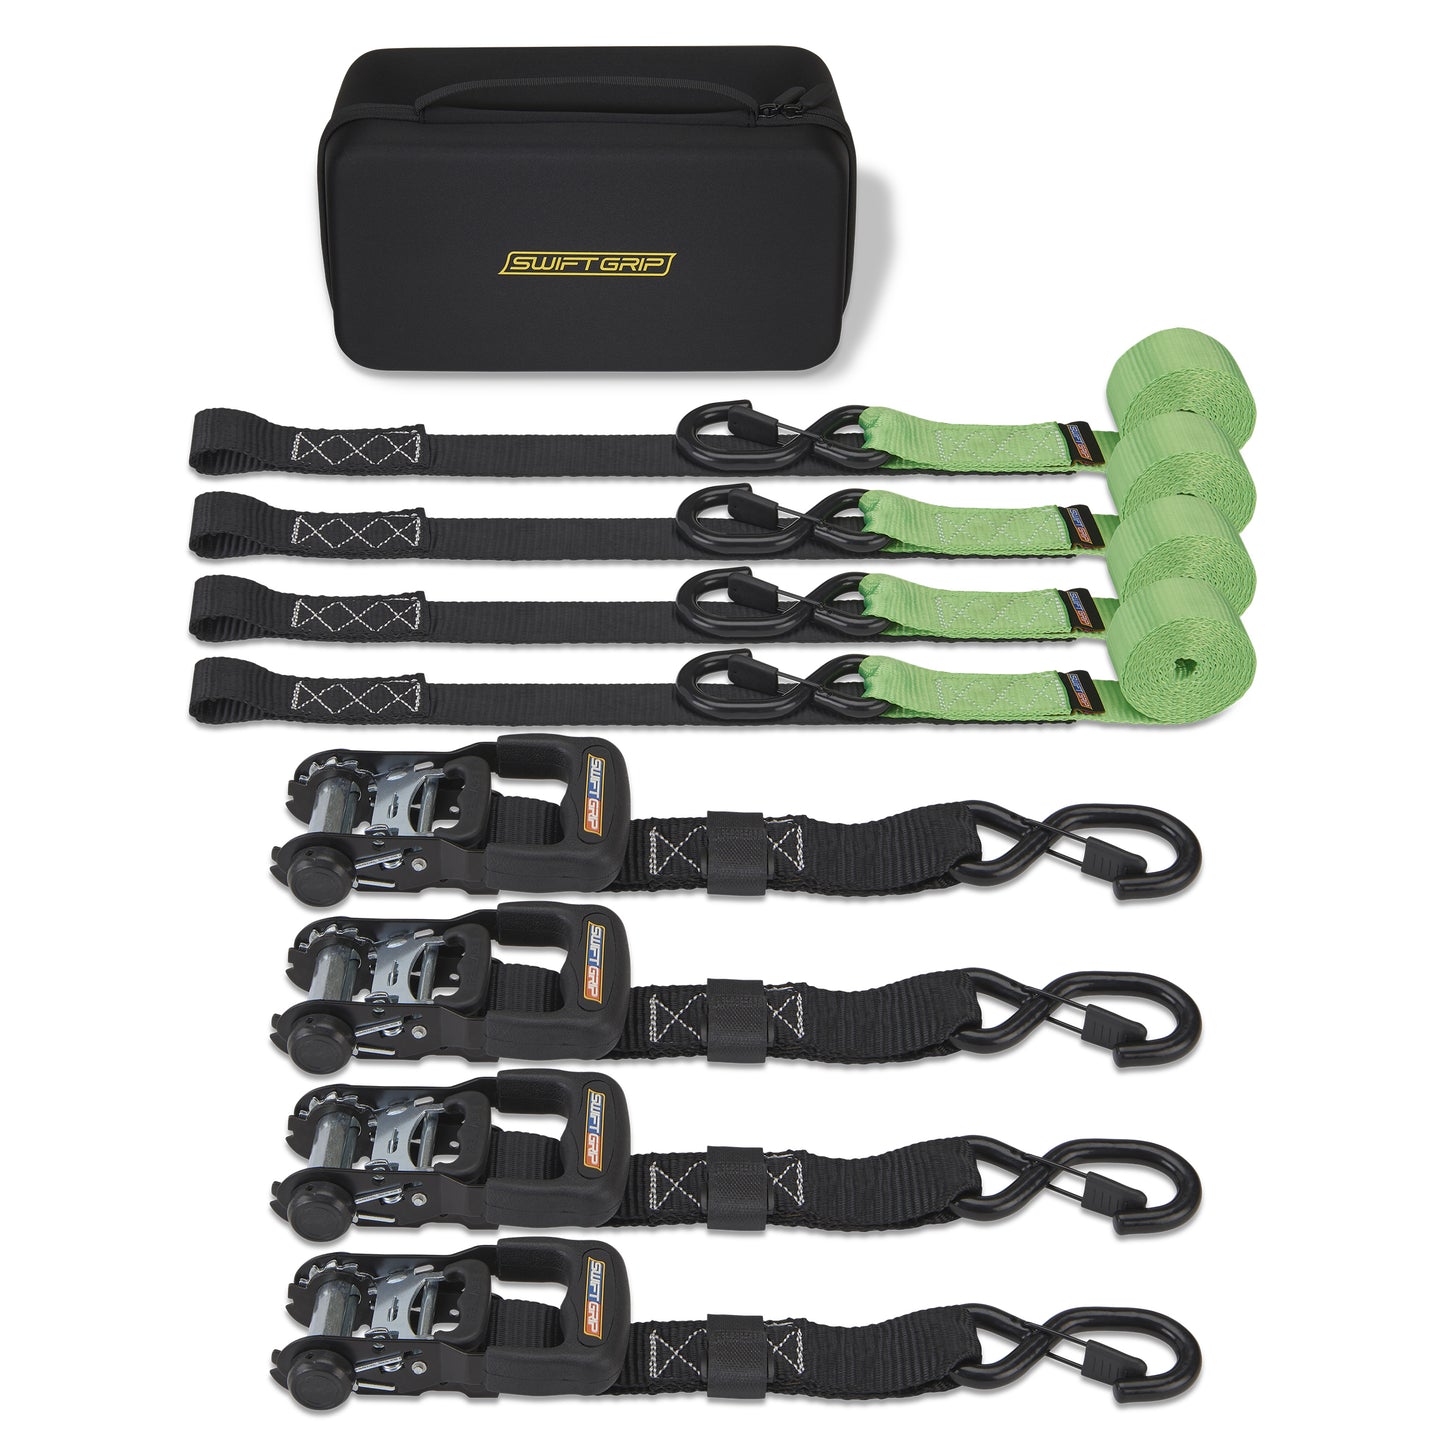 Heavy Duty Ratchet Strap Tie Down Kit, with Integrated Soft Tie Hook, Padded Handles & Coated Chromoly Hooks